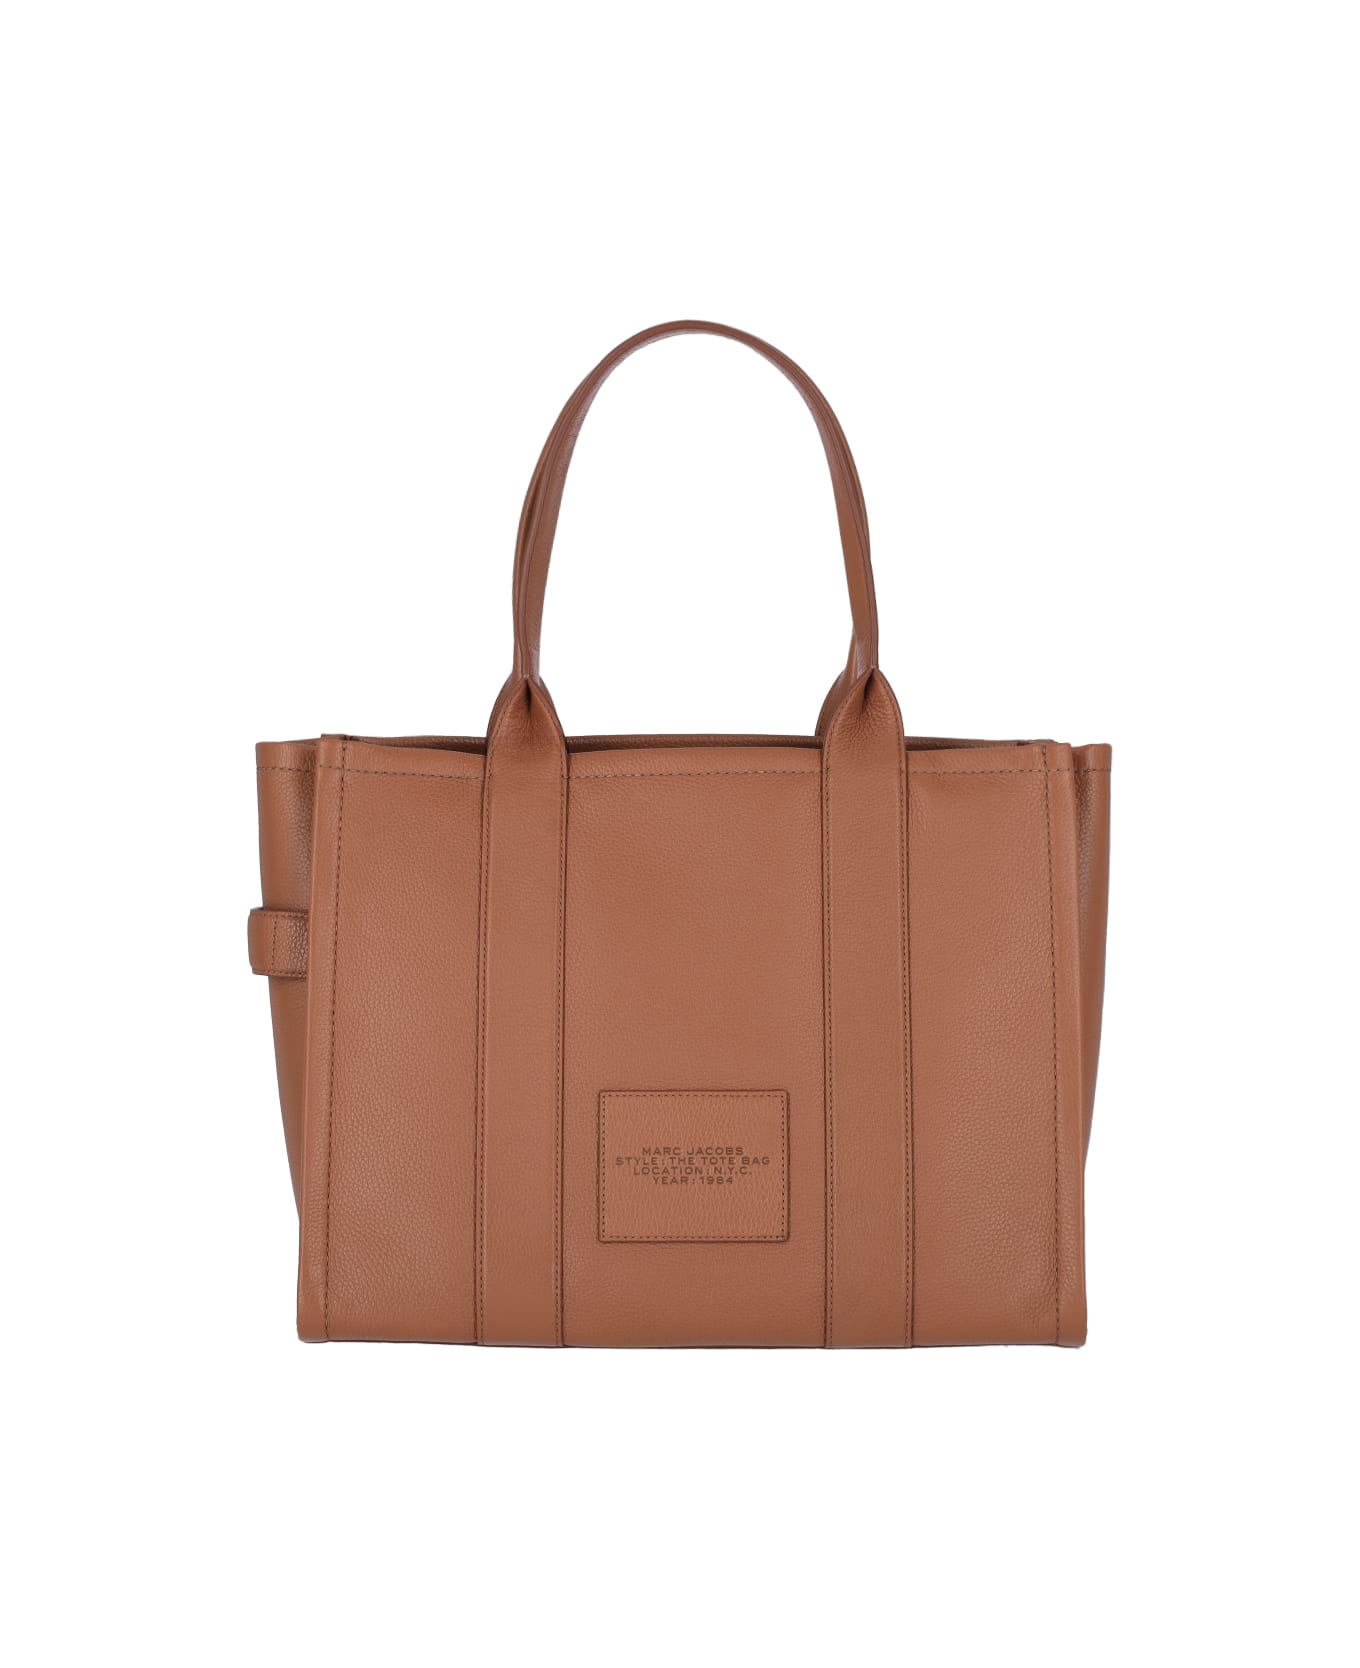 Marc Jacobs "the Leather Tote" Large Bag - Brown